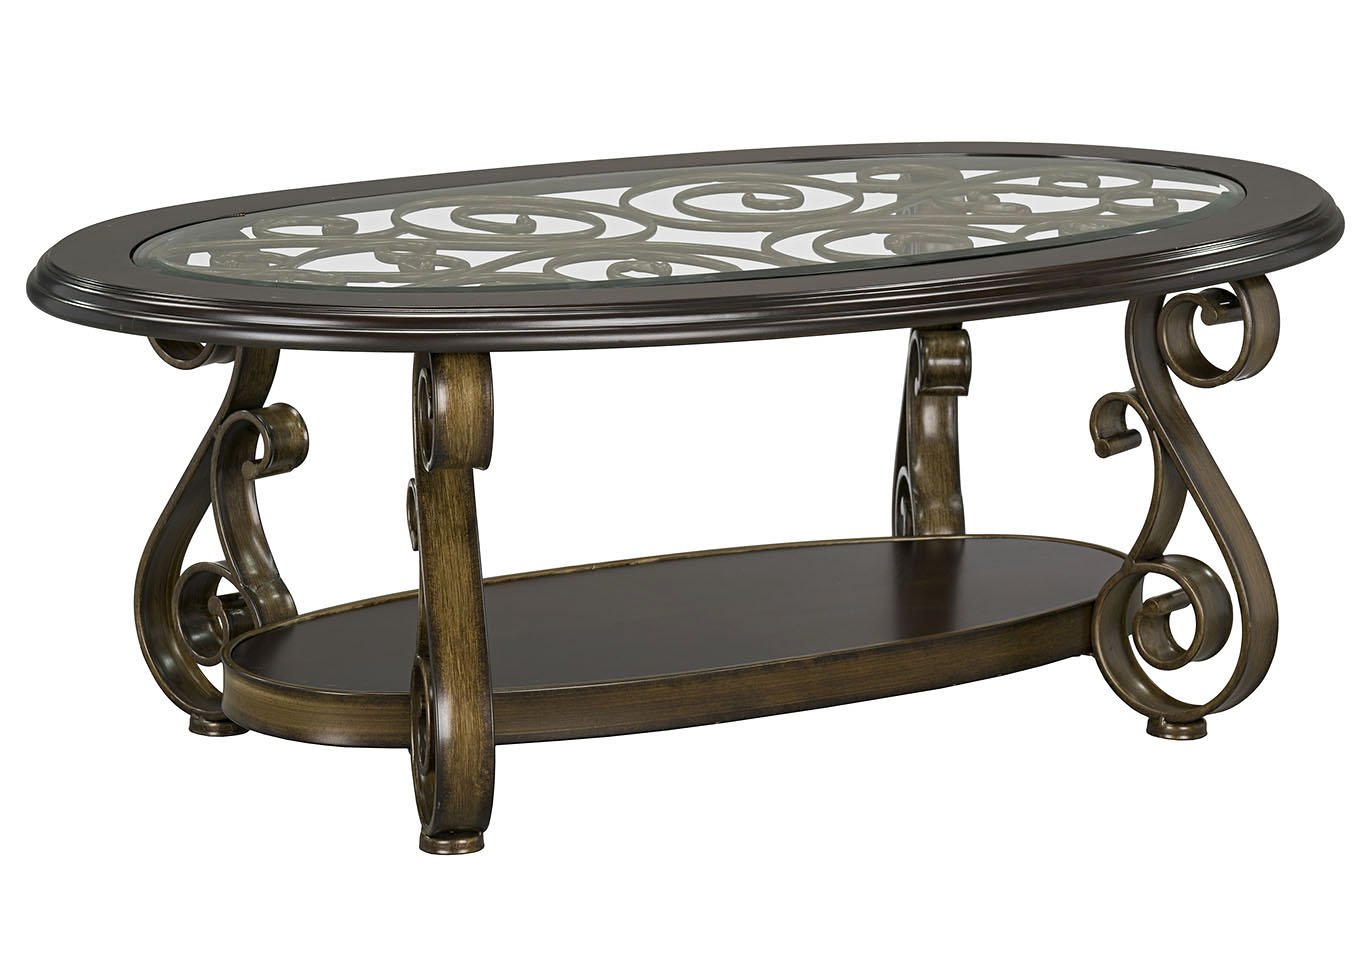 Bombay Oval Cocktail Table,Standard